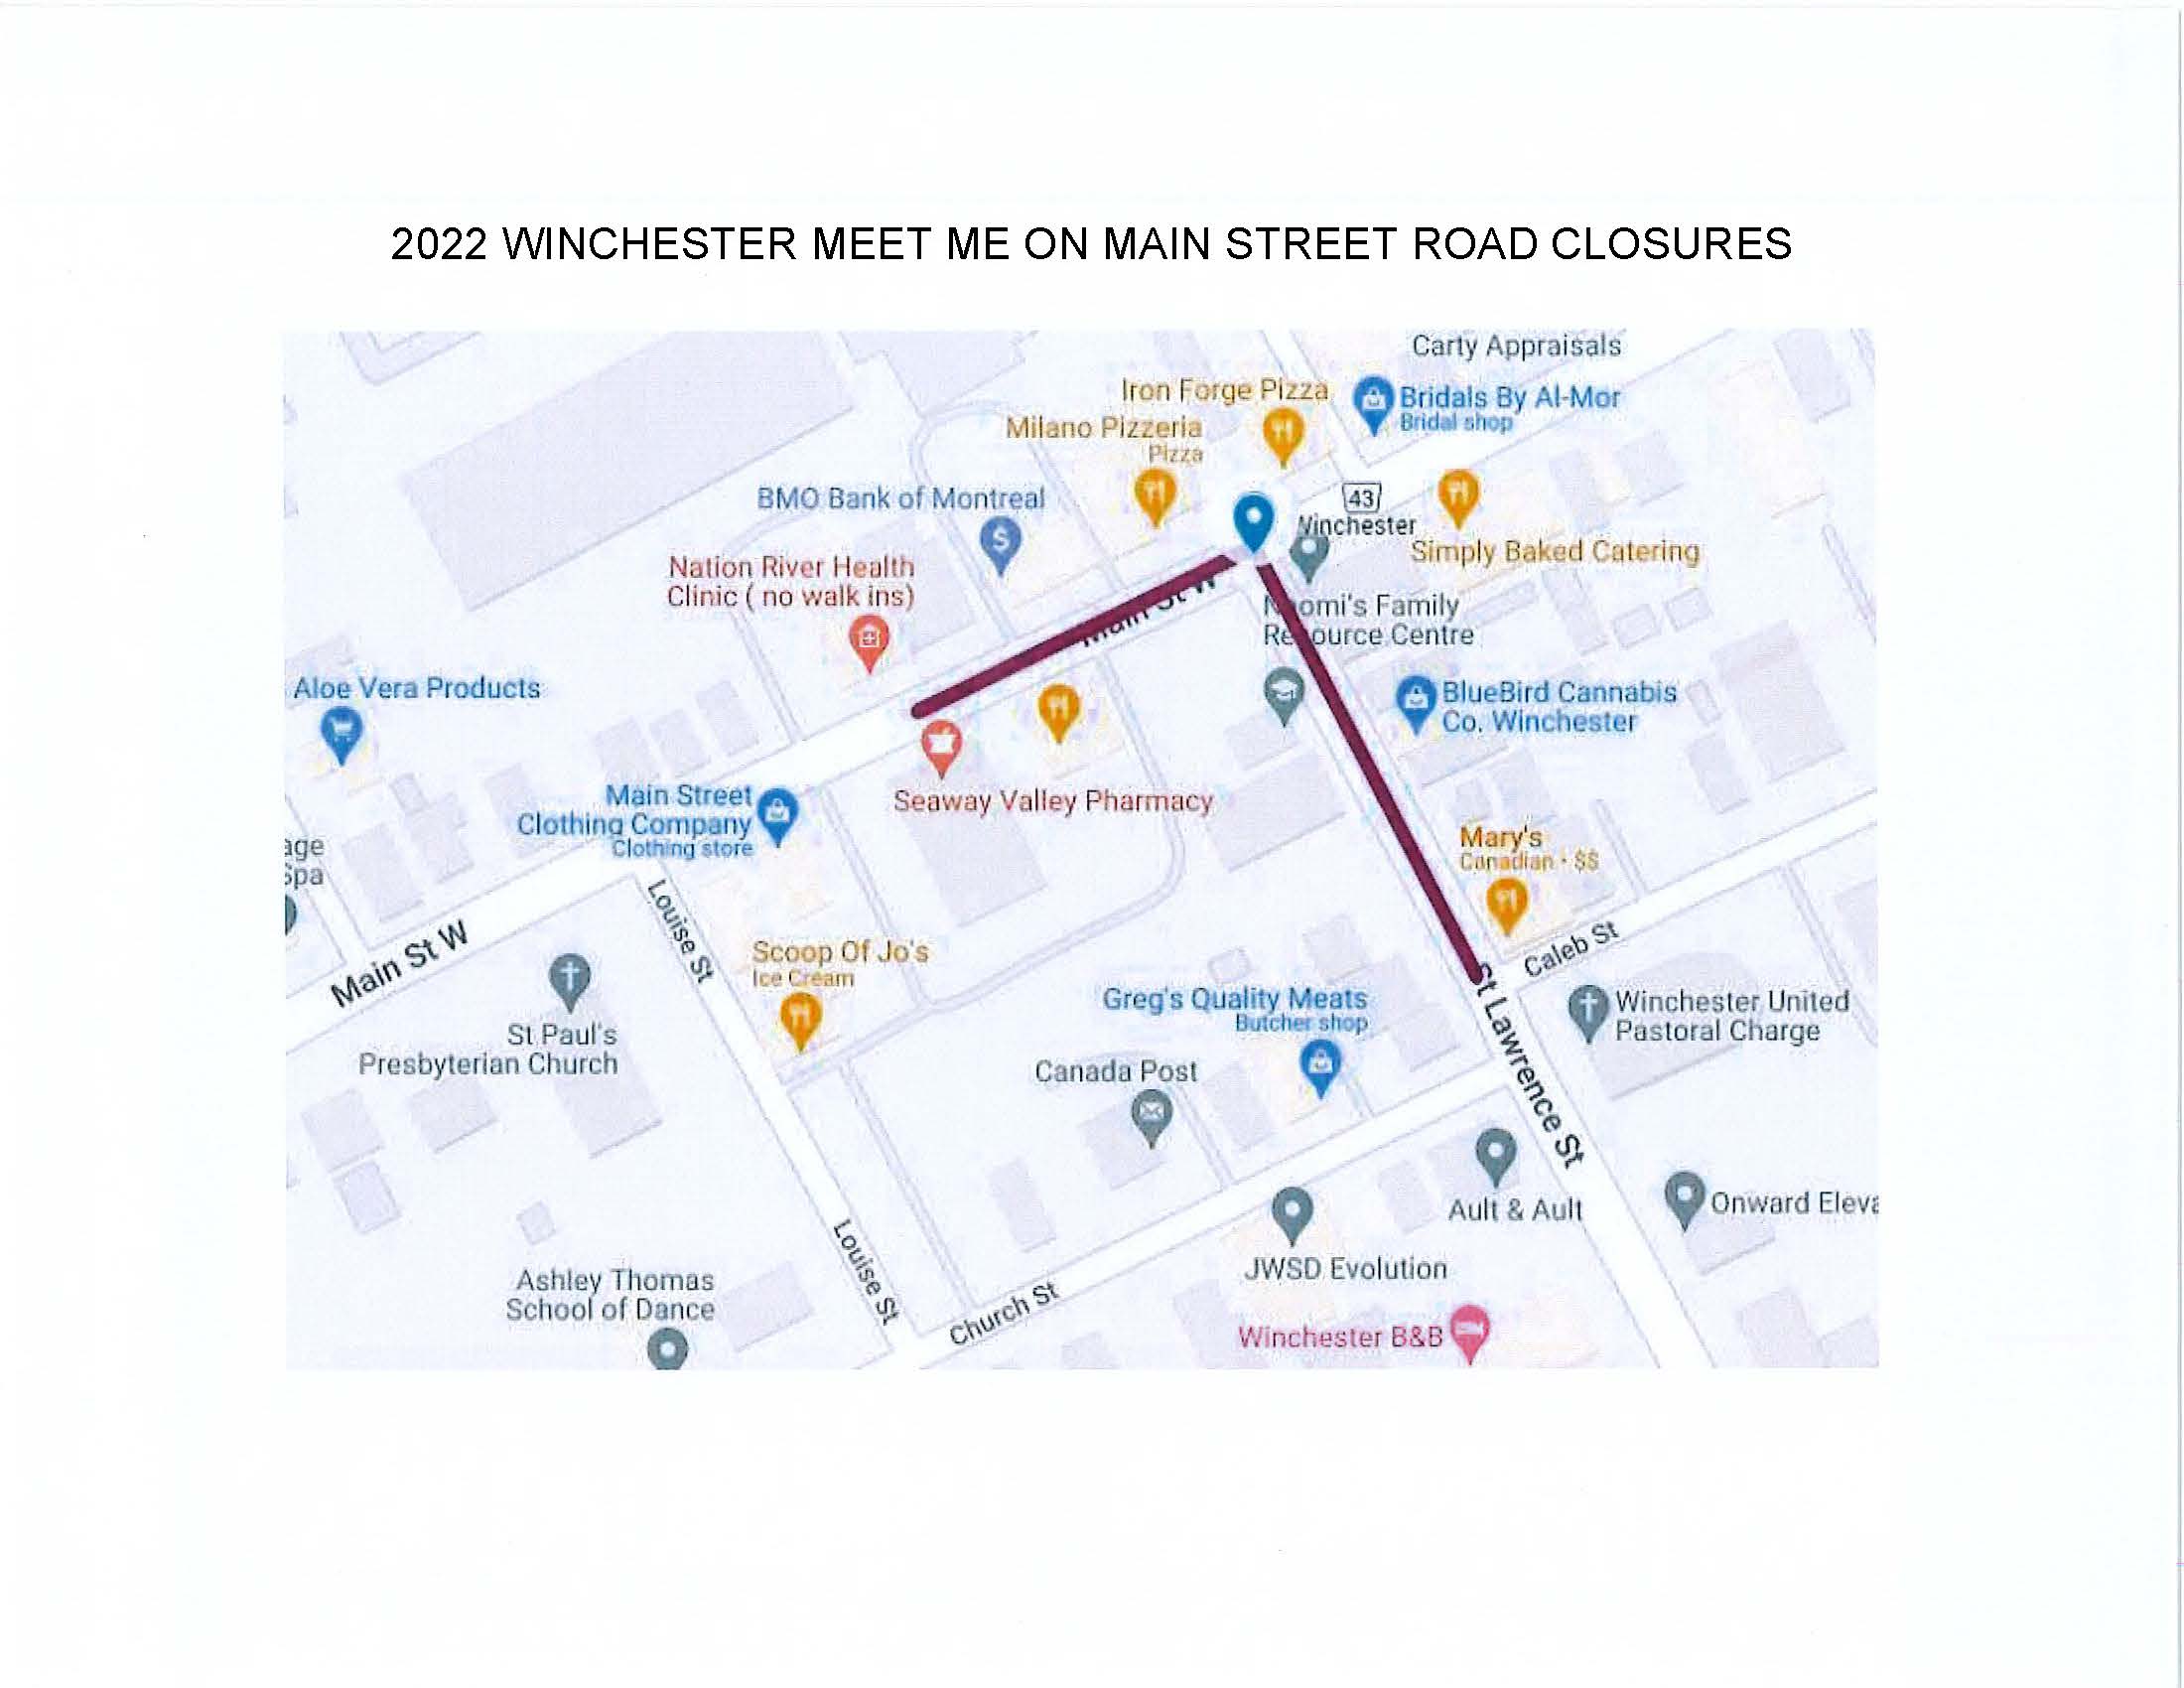 2022 Winchester MMOMS Road Closures Map